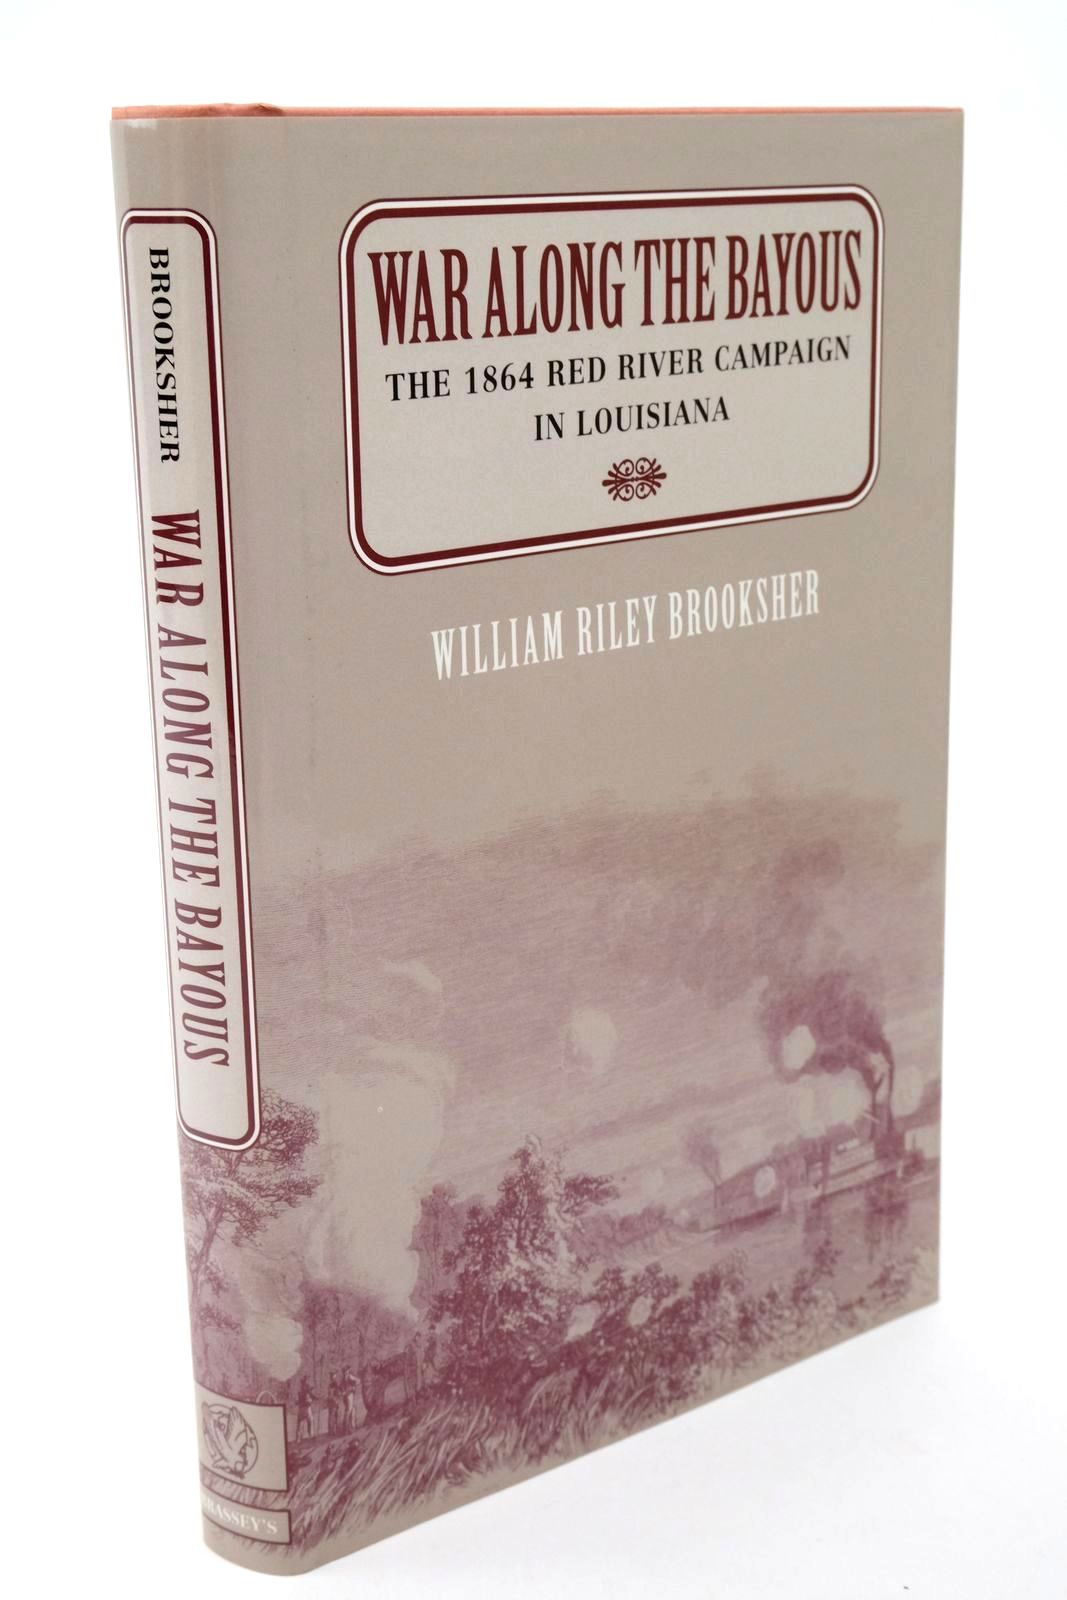 Photo of WAR ALONG THE BAYOUS THE 1864 RED RIVER CAMPAIGN IN LOUISIANA written by Brooksher, William Riley published by Brassey's (STOCK CODE: 1322540)  for sale by Stella & Rose's Books